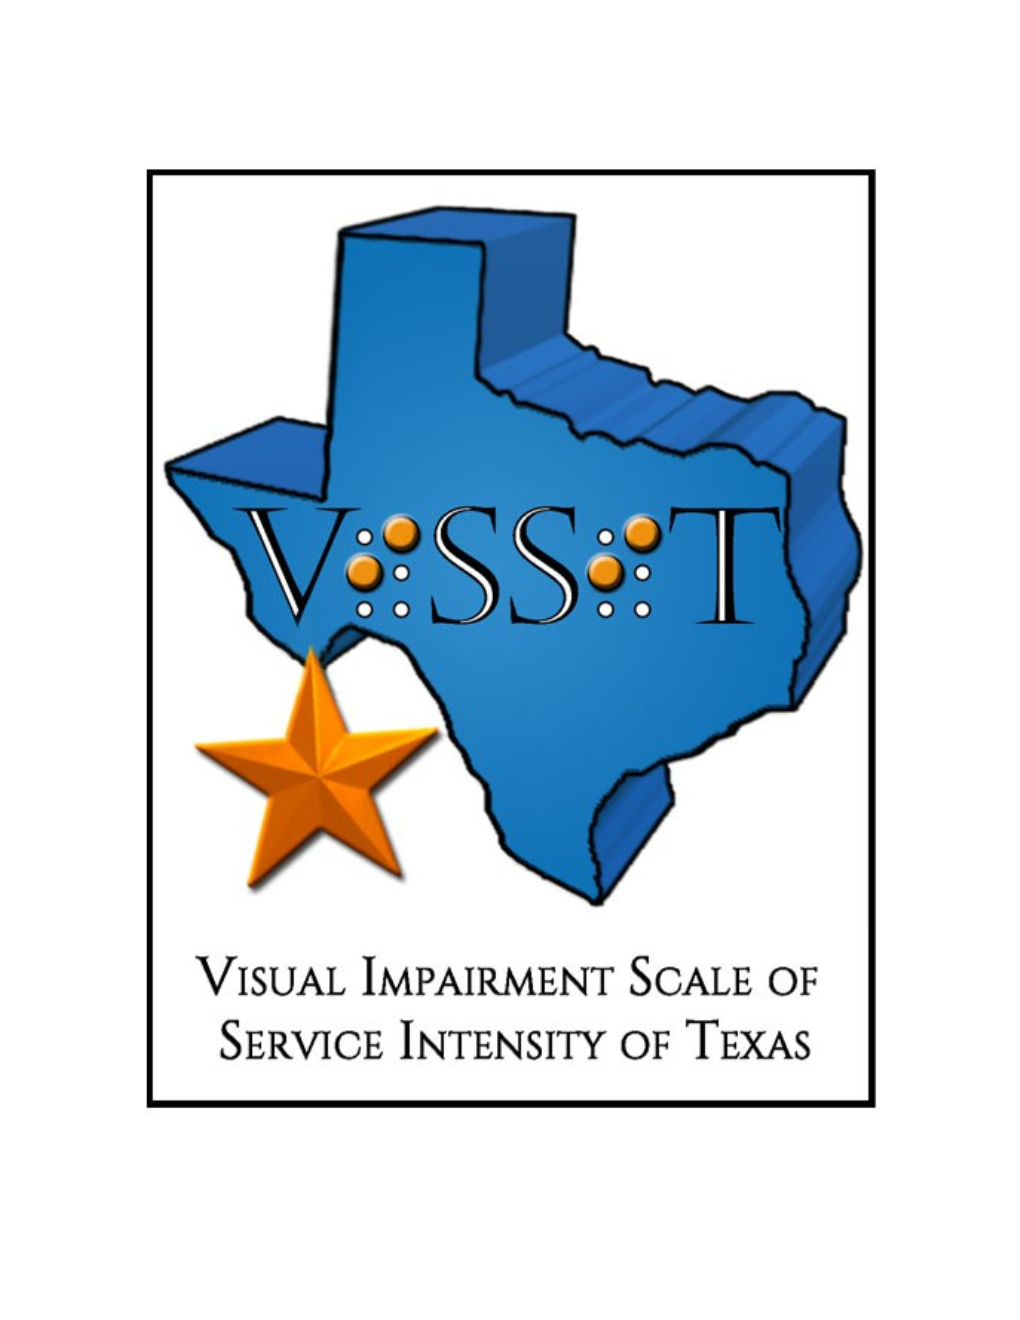 Visual Impairment Scale of Service Intensity of Texas